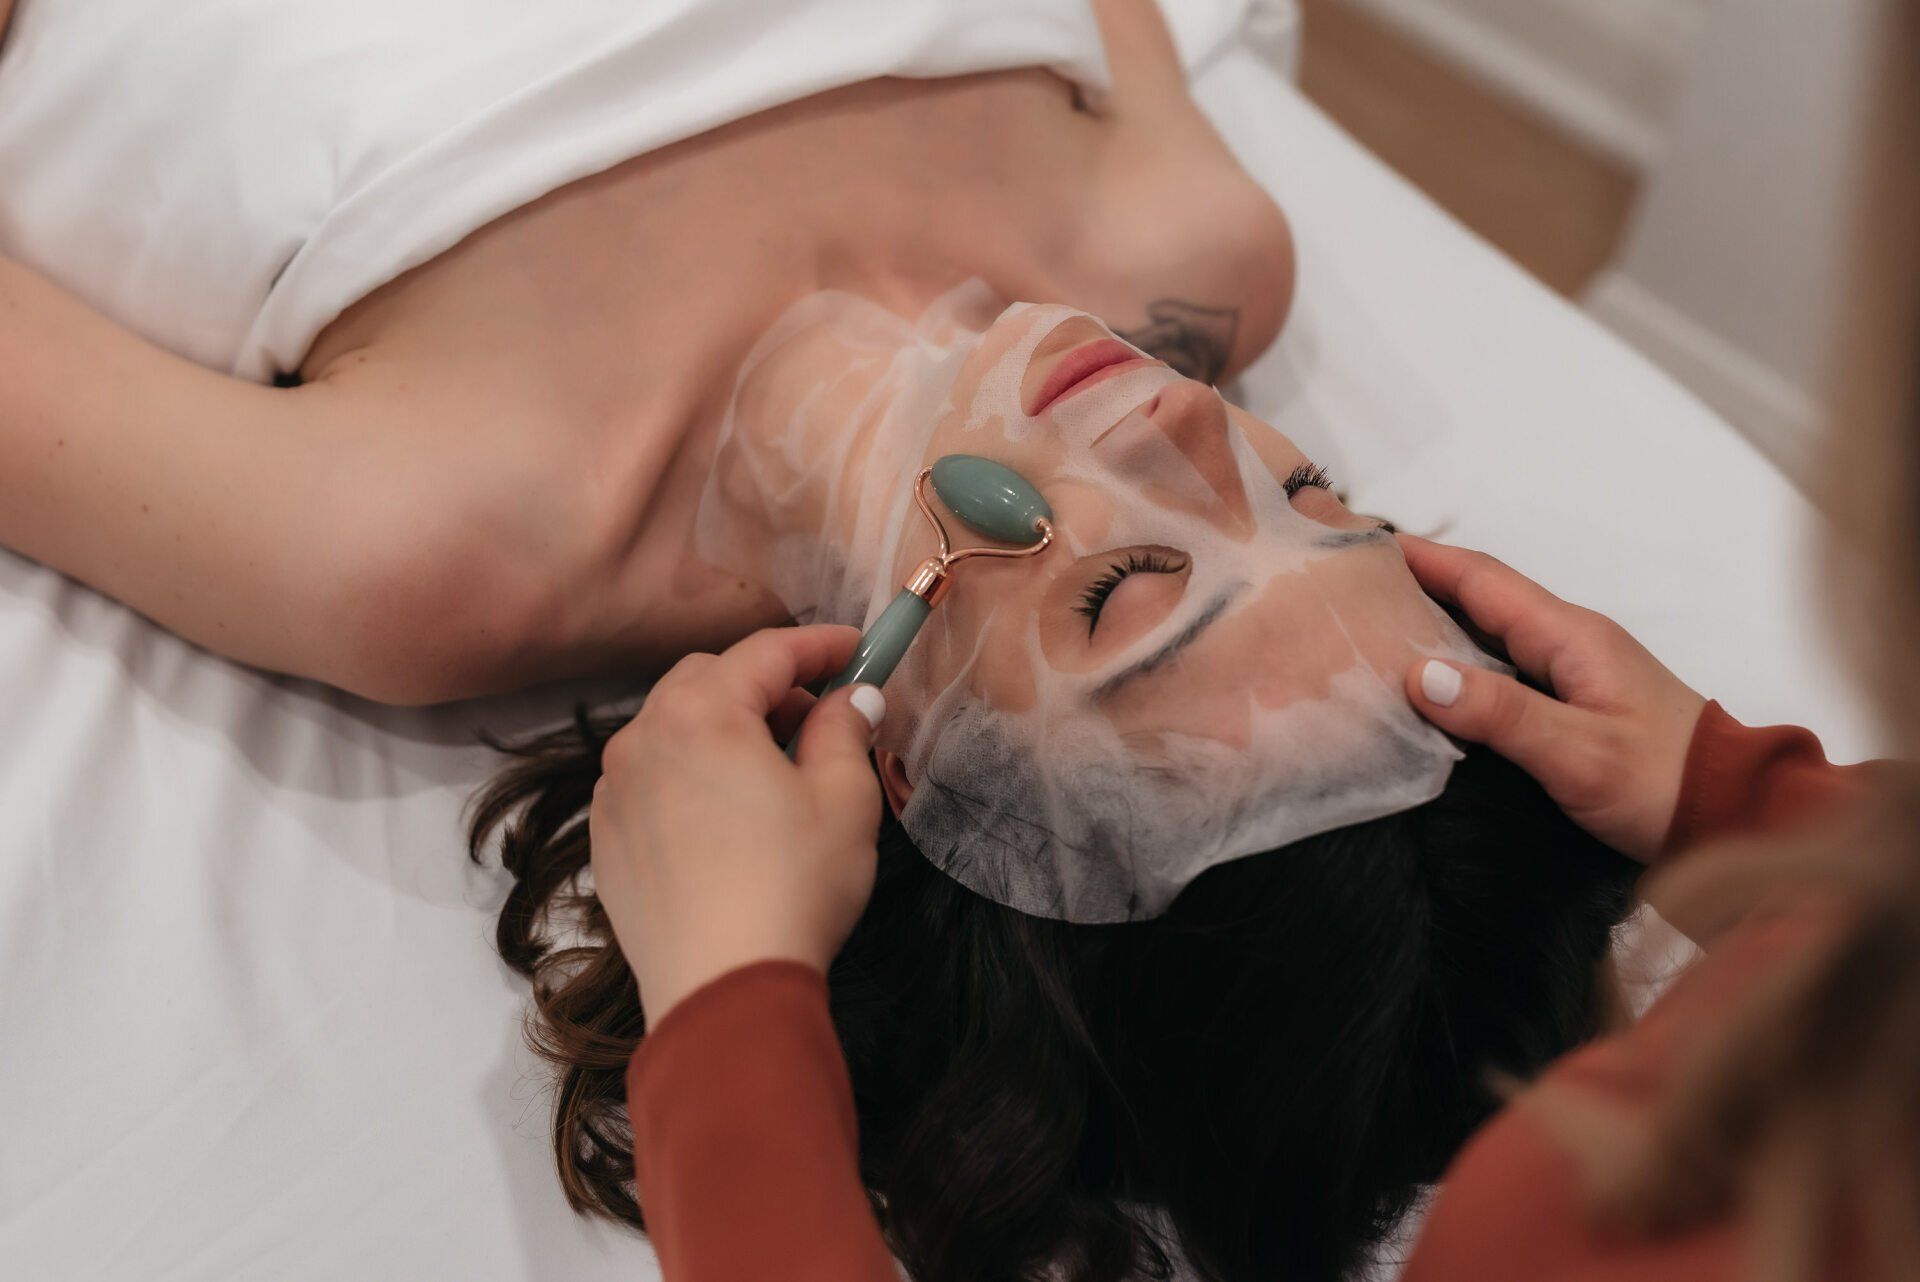 A woman receiving a facial treatment while lying on a spa treatment table